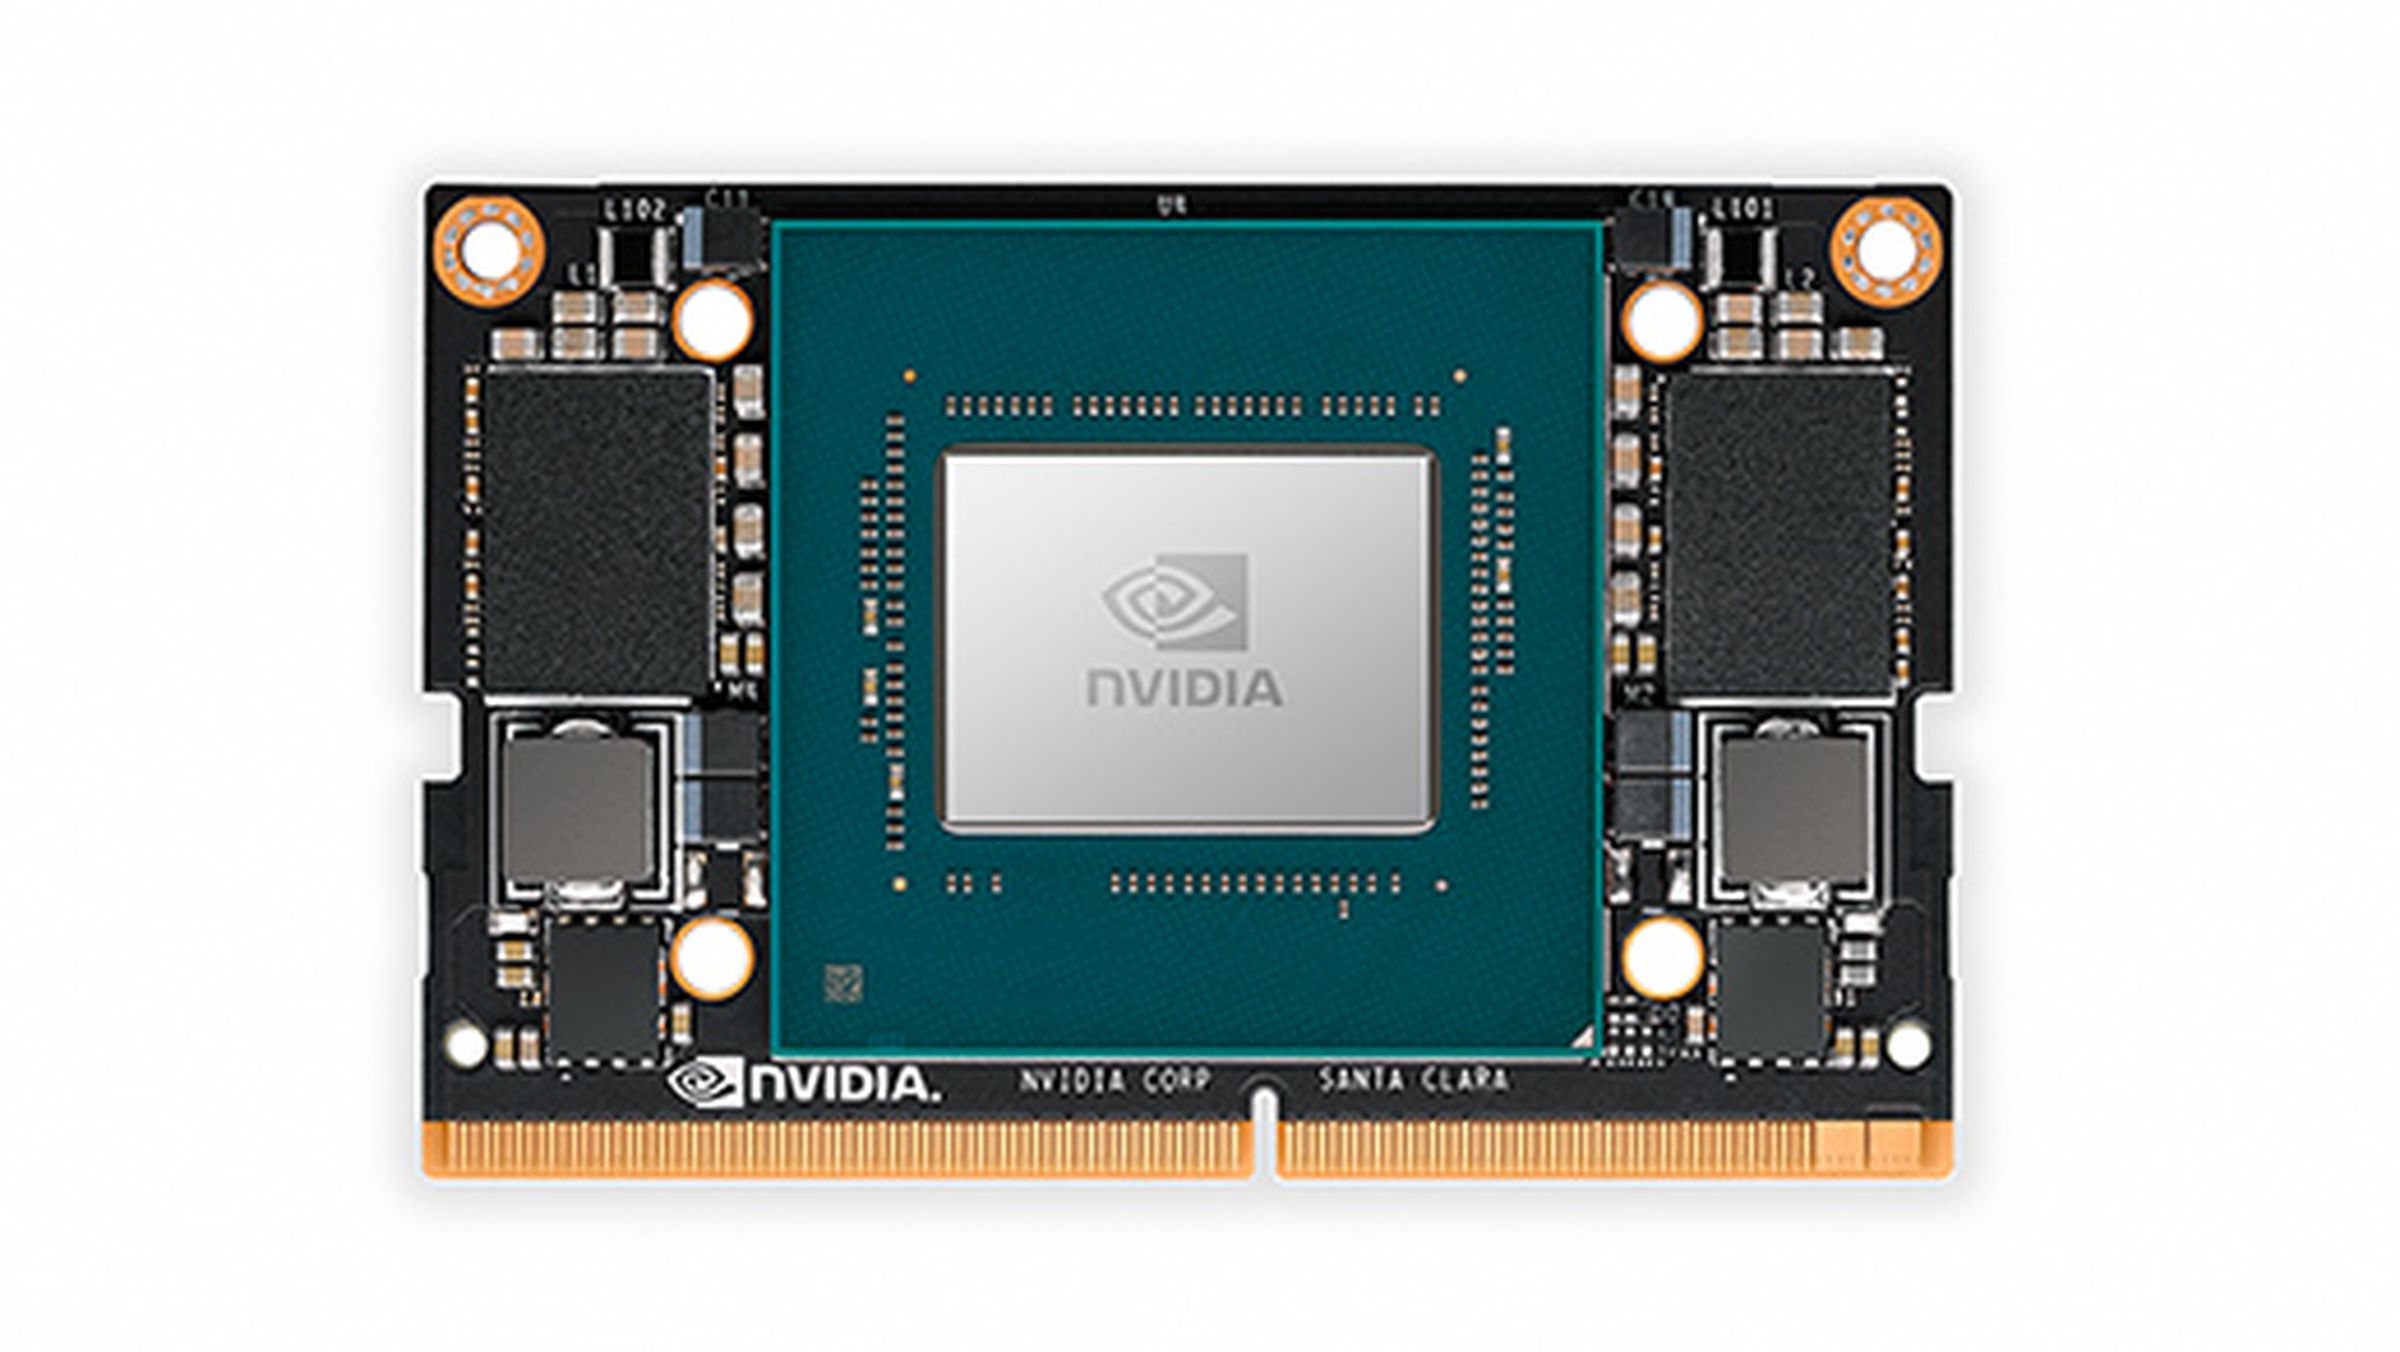 Image showing a system-on-chip, branded with the Nvidia logo. The system is an AI platform called the Nvidia Jetson Xavier NX Module.